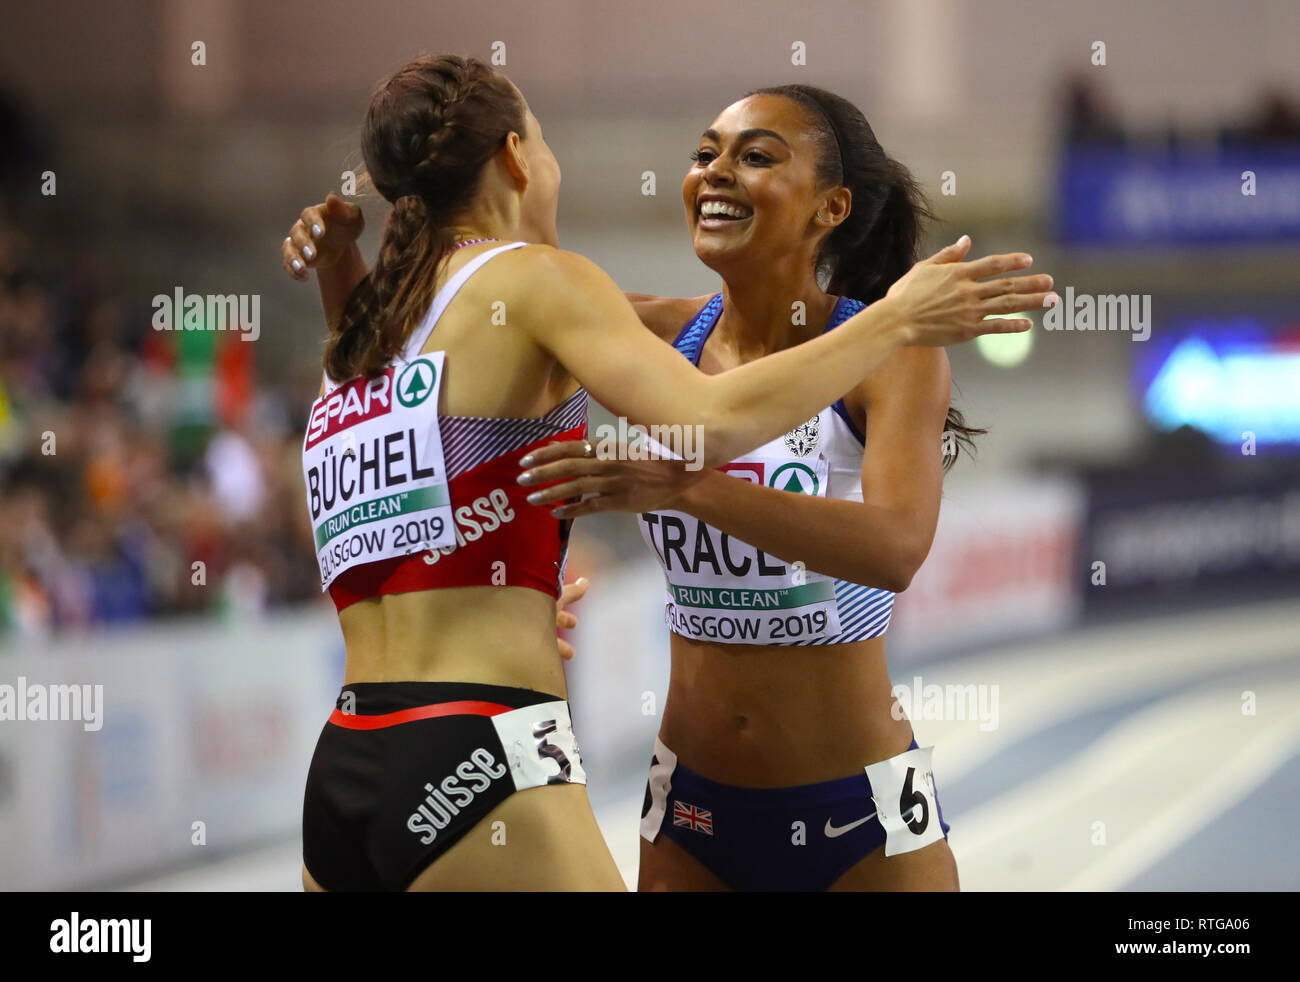 Great Britain's Adelle Tracey (right) hugs Switzerland's Selina Buchel after the Women's 800m Heat 1 during day one of the European Indoor Athletics Championships at the Emirates Arena, Glasgow. Stock Photo